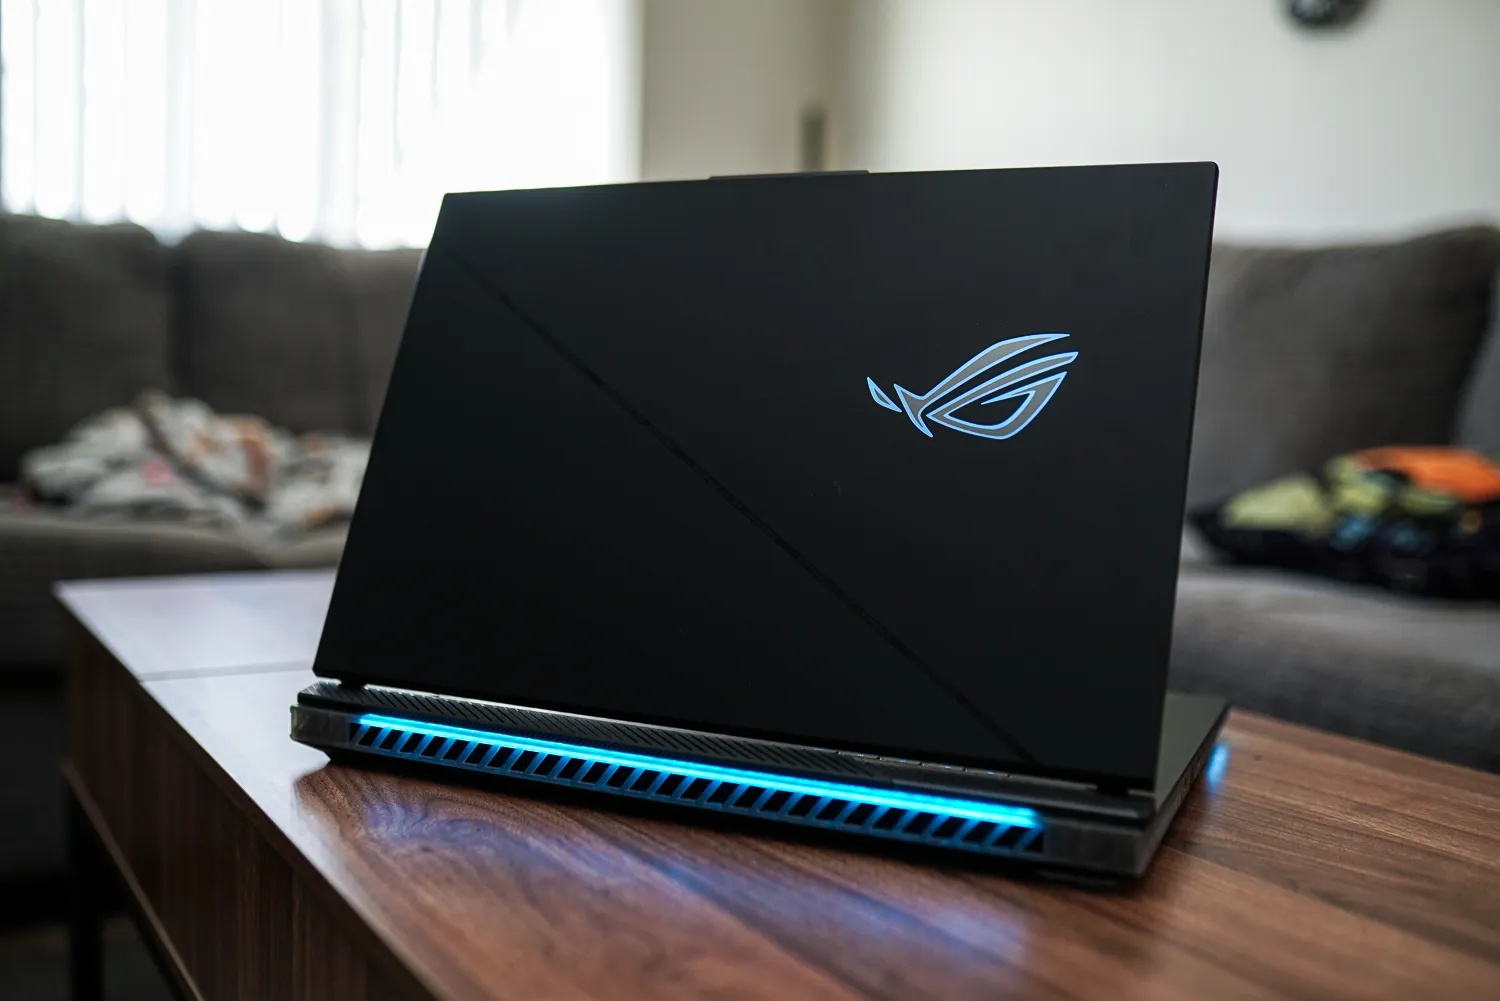 The lid of the Asus ROG Strix Scar 18 laptop